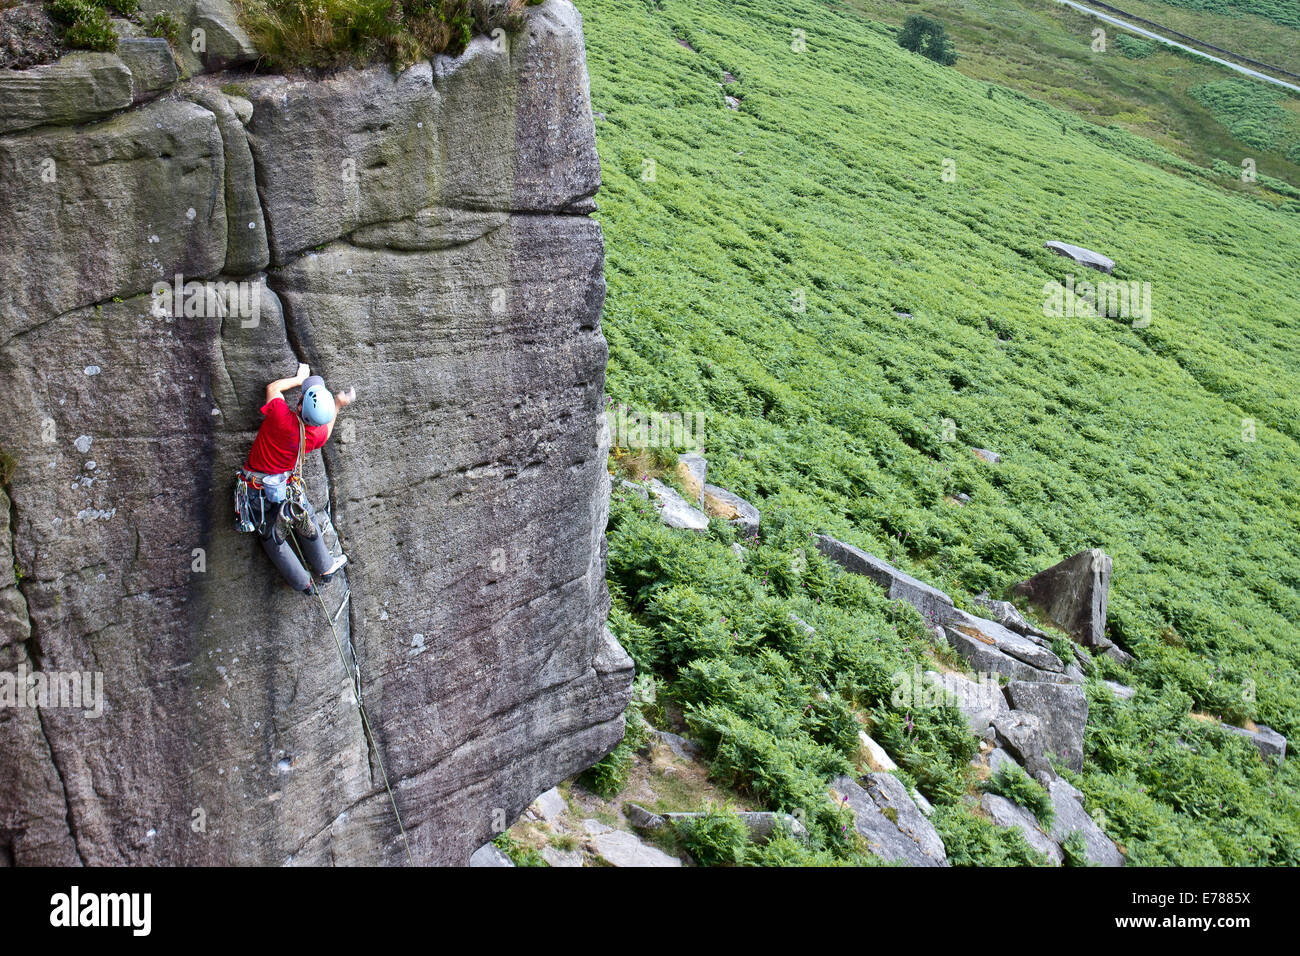 A man rock climbing at Stanage Edge nr Hathersage and Sheffield in the Peak District National Park, England UK Stock Photo